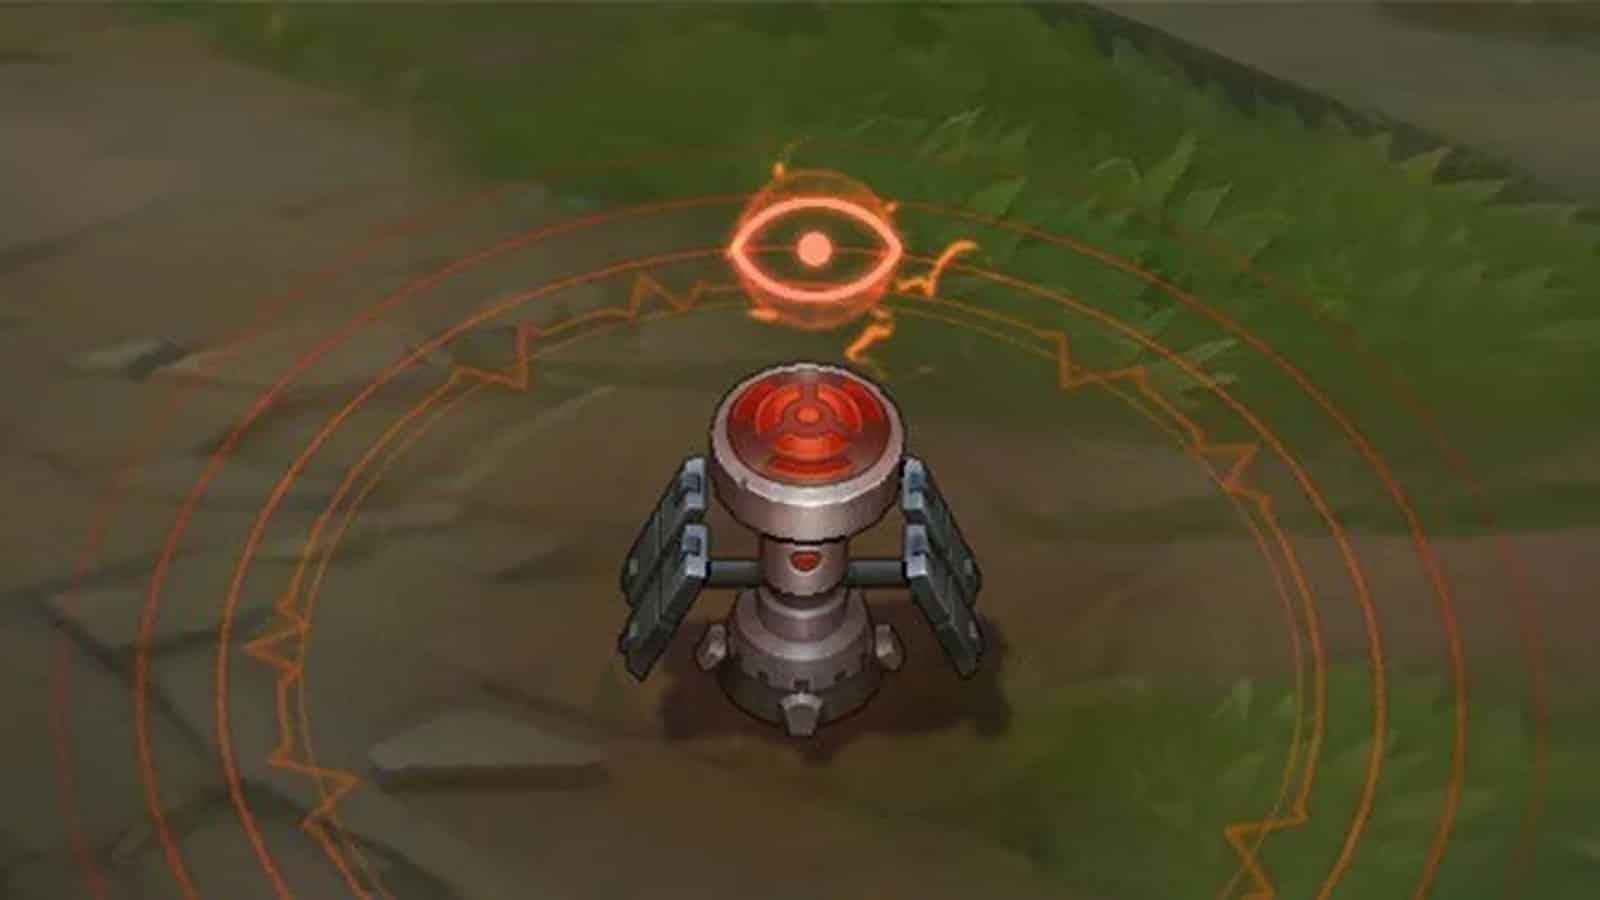 Remember, pink wards should be placed to suppress enemy vision and control an area, not just to gain vision.